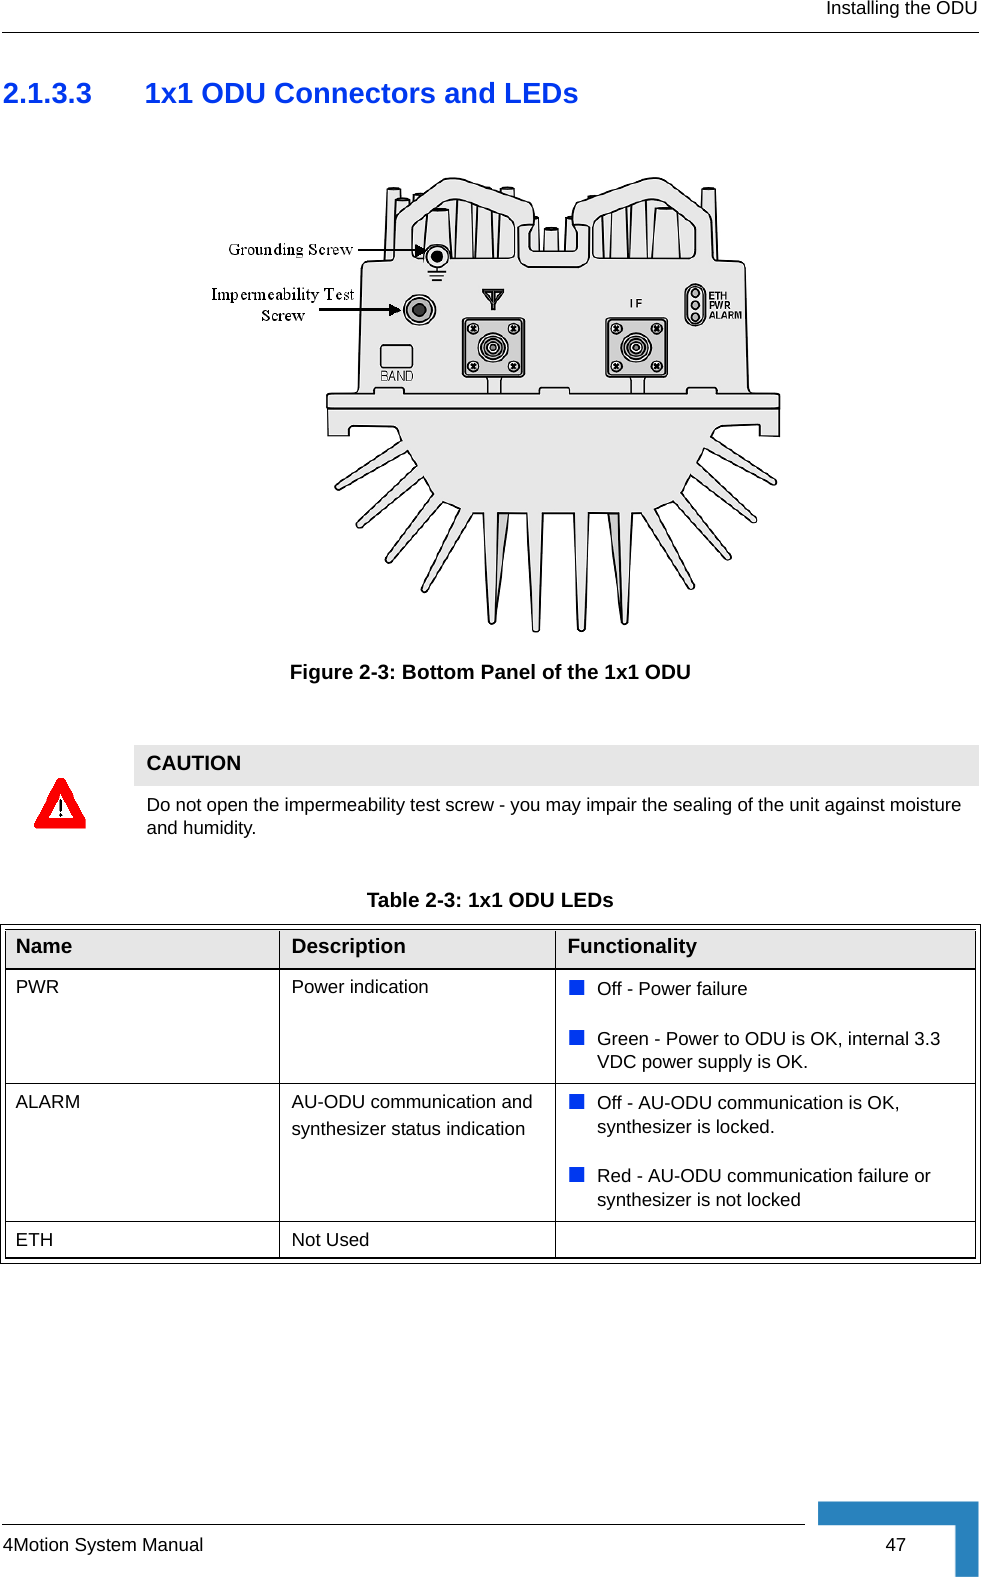 Installing the ODU4Motion System Manual  472.1.3.3 1x1 ODU Connectors and LEDsFigure 2-3: Bottom Panel of the 1x1 ODU CAUTIONDo not open the impermeability test screw - you may impair the sealing of the unit against moisture and humidity.Table 2-3: 1x1 ODU LEDsName Description FunctionalityPWR Power indication Off - Power failureGreen - Power to ODU is OK, internal 3.3 VDC power supply is OK.ALARM AU-ODU communication and synthesizer status indicationOff - AU-ODU communication is OK, synthesizer is locked.Red - AU-ODU communication failure or synthesizer is not lockedETH Not Used